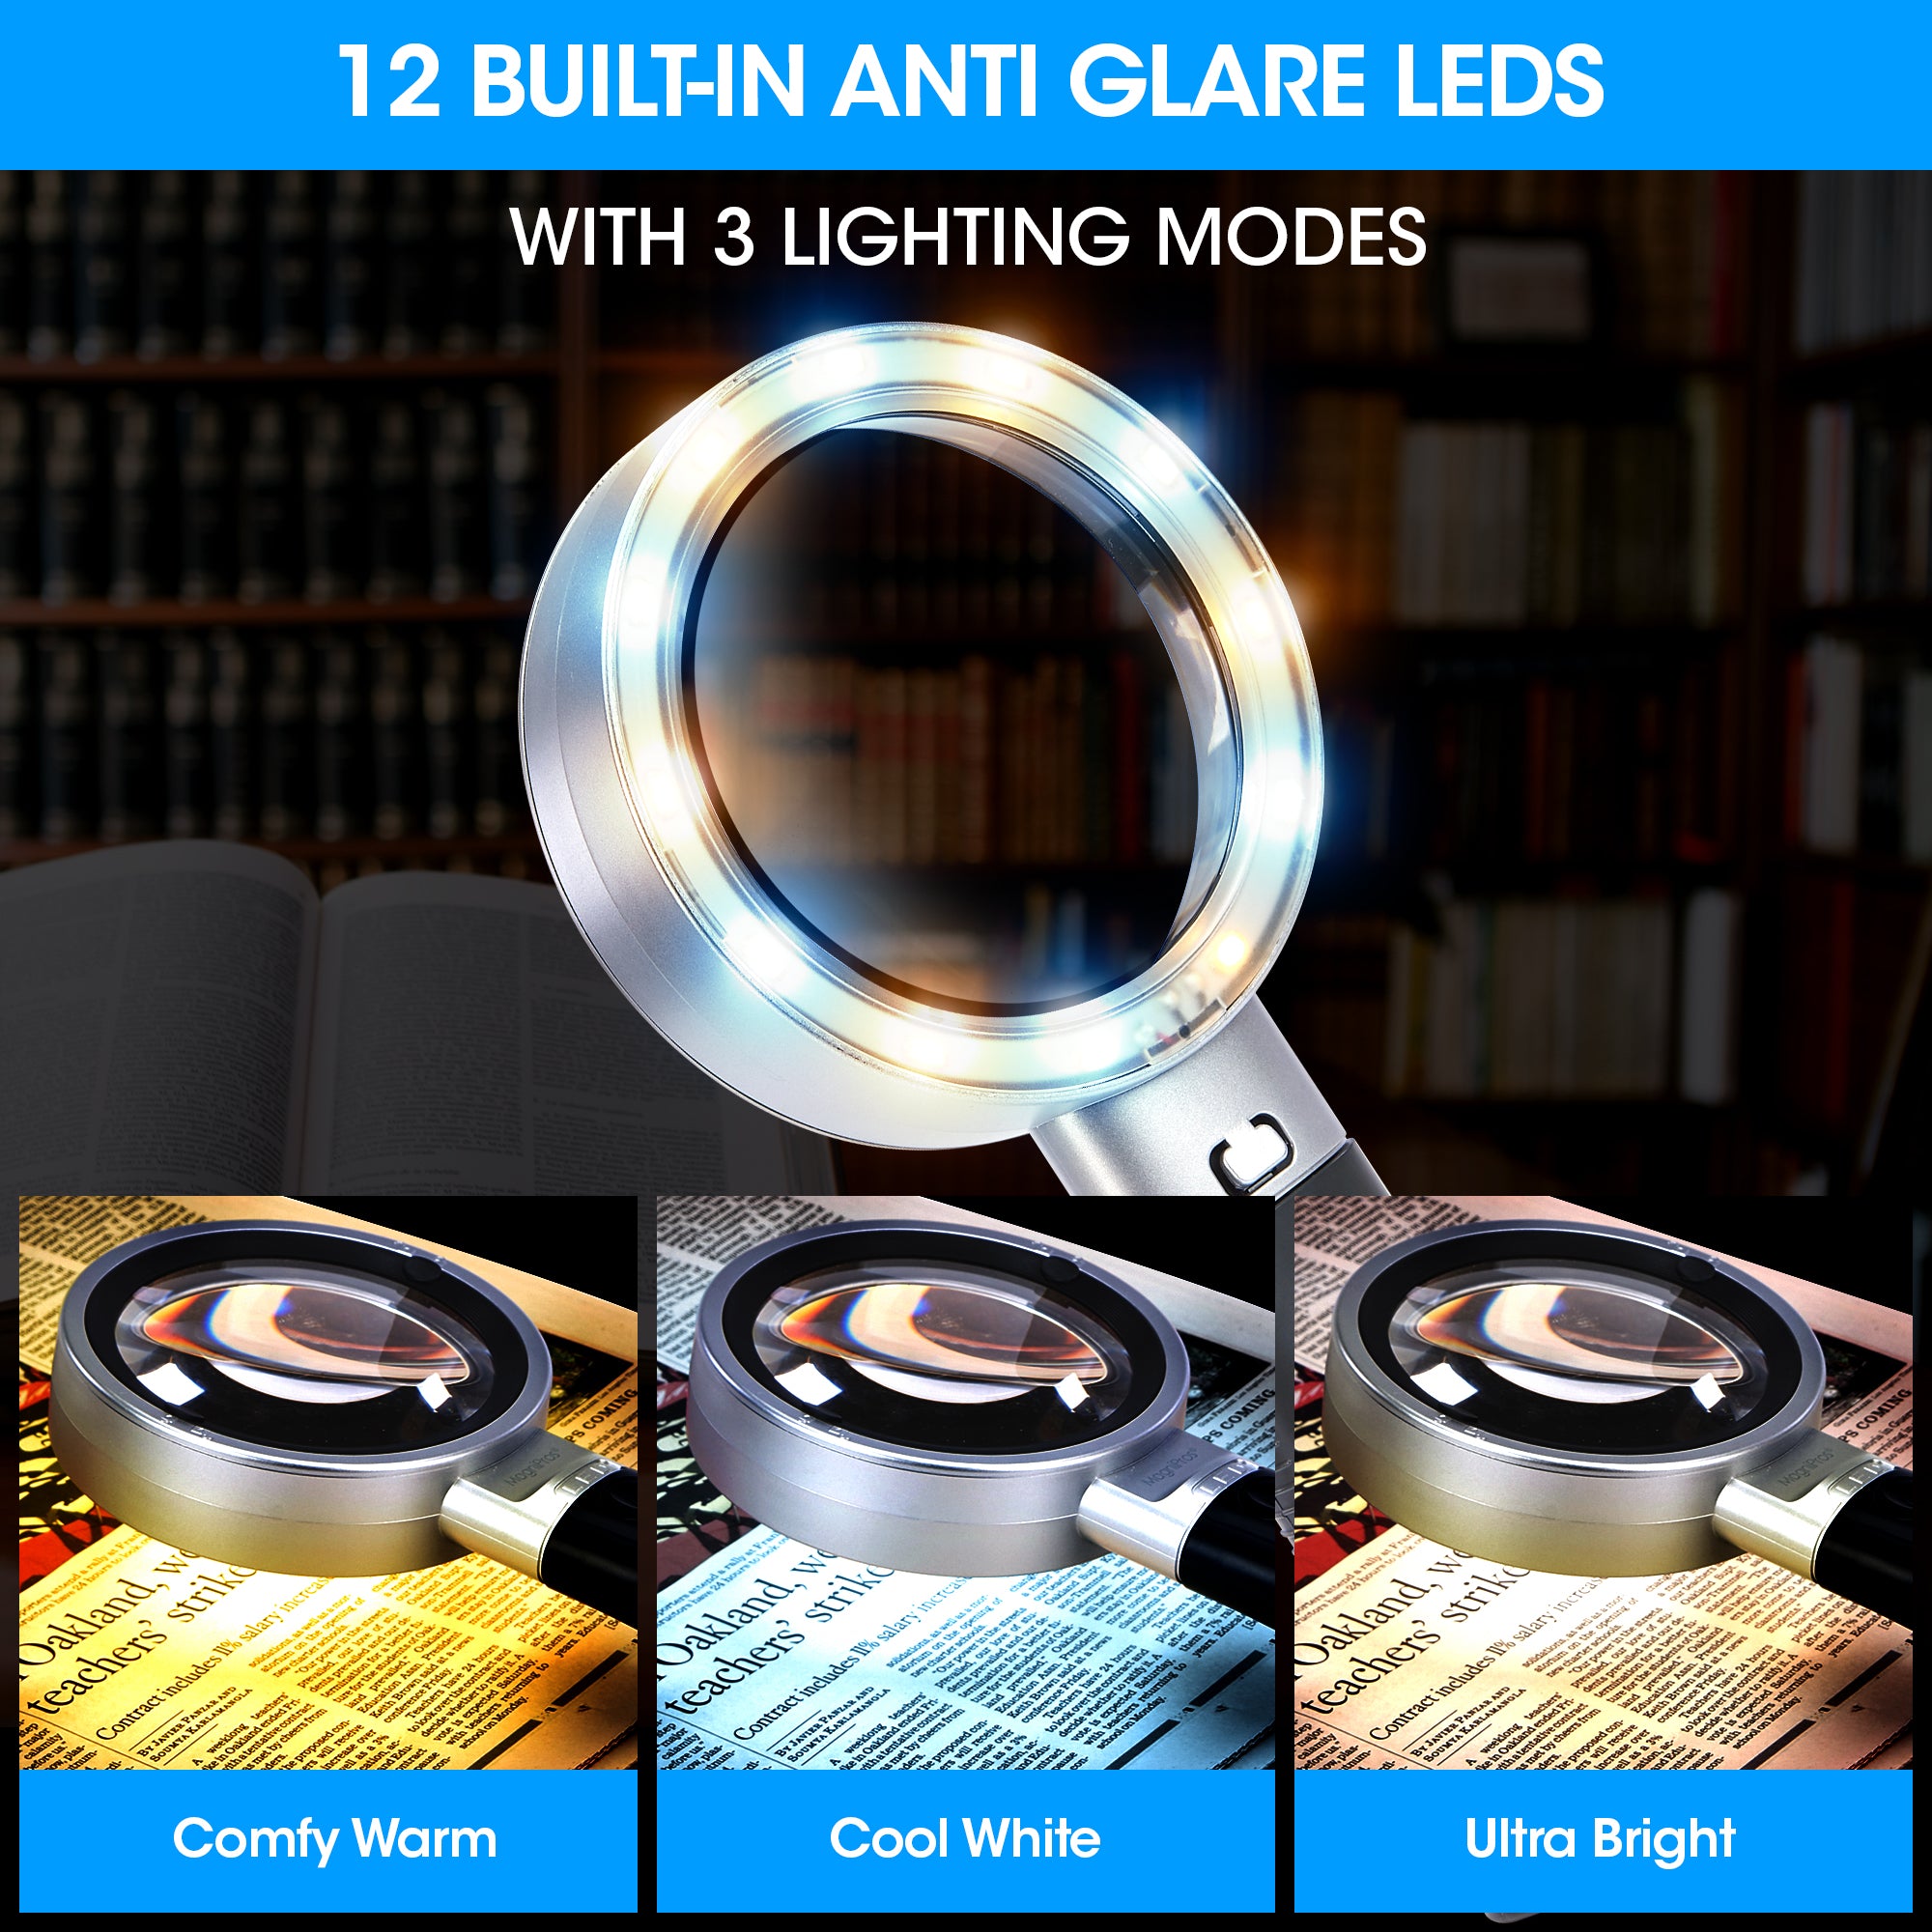 Magnifying Glass with Light, 30X High Power Handheld Large Magnifiers 12 LED Illuminated Lighted Magnifier Lens for Seniors Reading Small Print Stamps